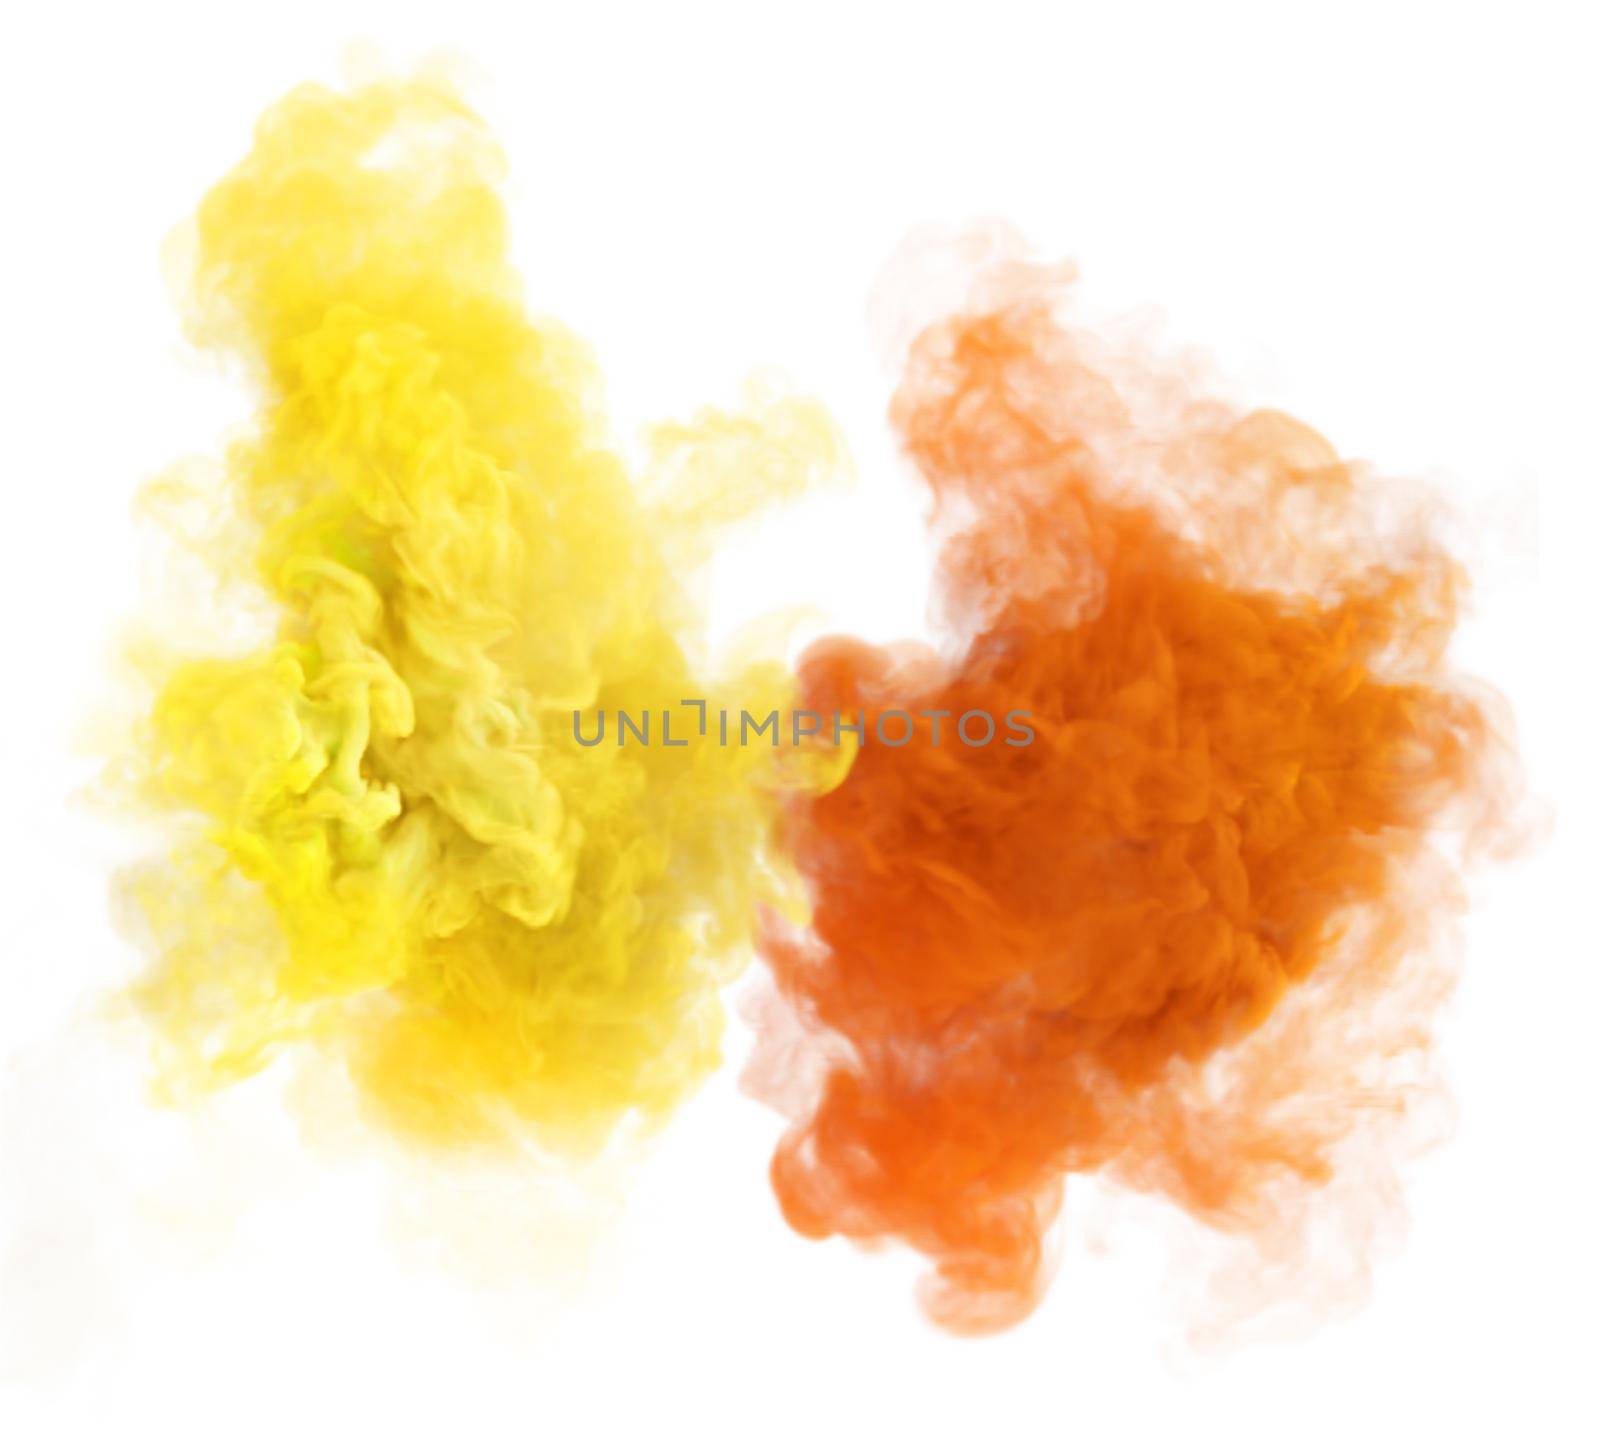 Orange and yellow puffs of toxic smoke. Mistery and dangerous fog texture. Duo colors 3D render abstract background for fan festivals and party